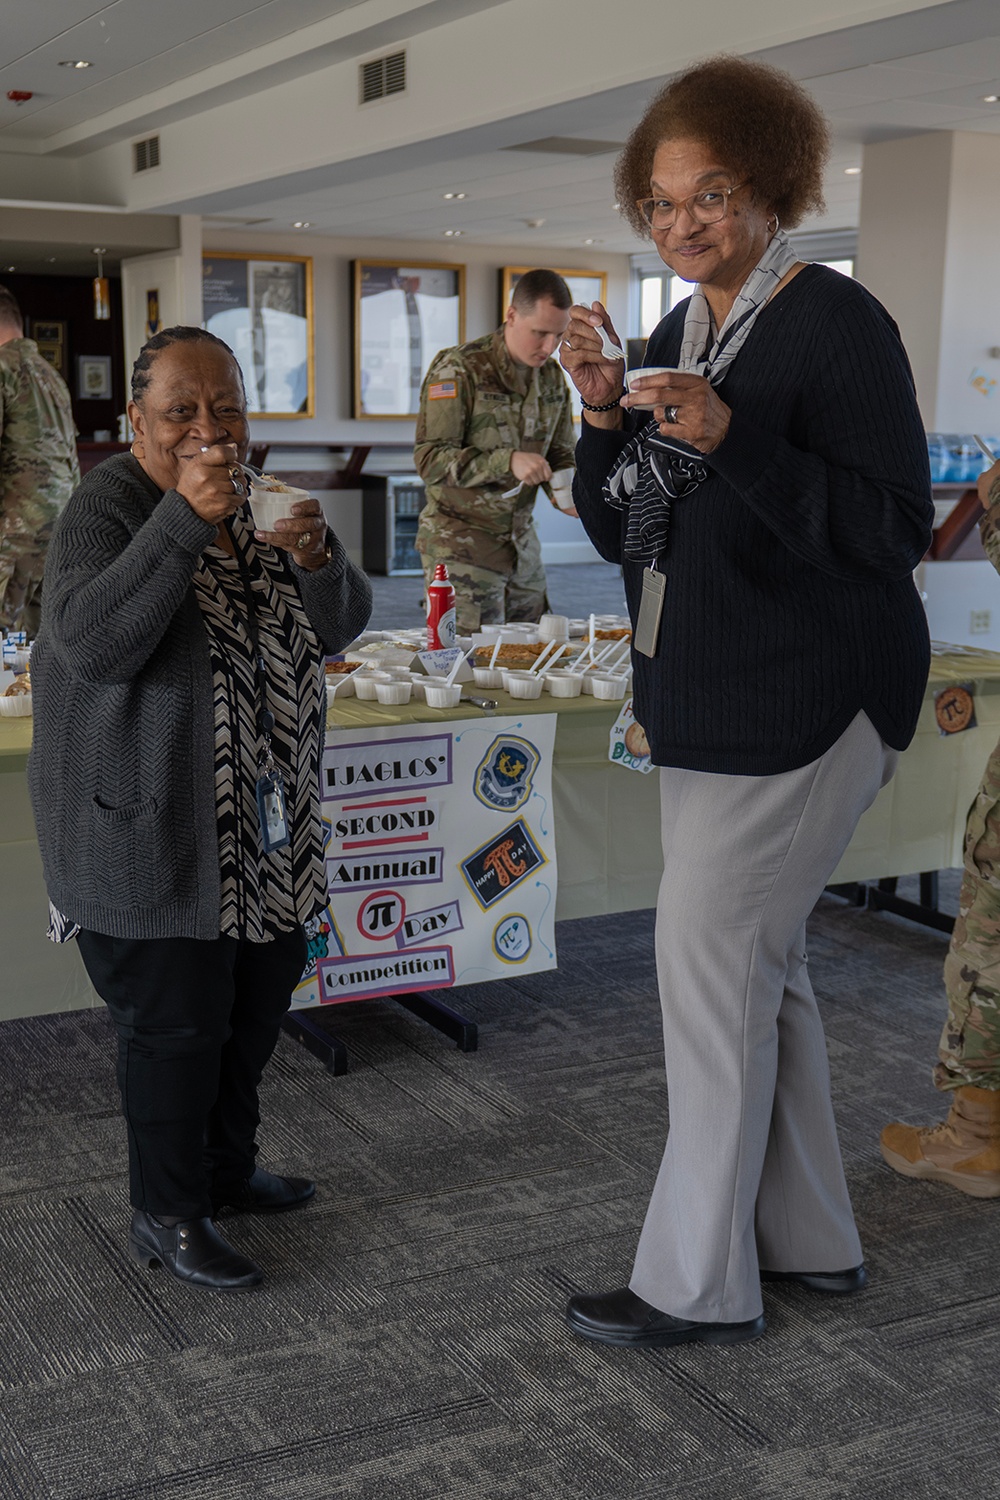 Photo By Billie Suttles | Linda Cuffee, The Judge Advocate General's Legal Center and School's Continuing Legal Education Administrator, (right) and Barbara Wood, Tricare Specialist, (left) sample some entries during the annual TJAGLCS Pi Day Contest on March 14.